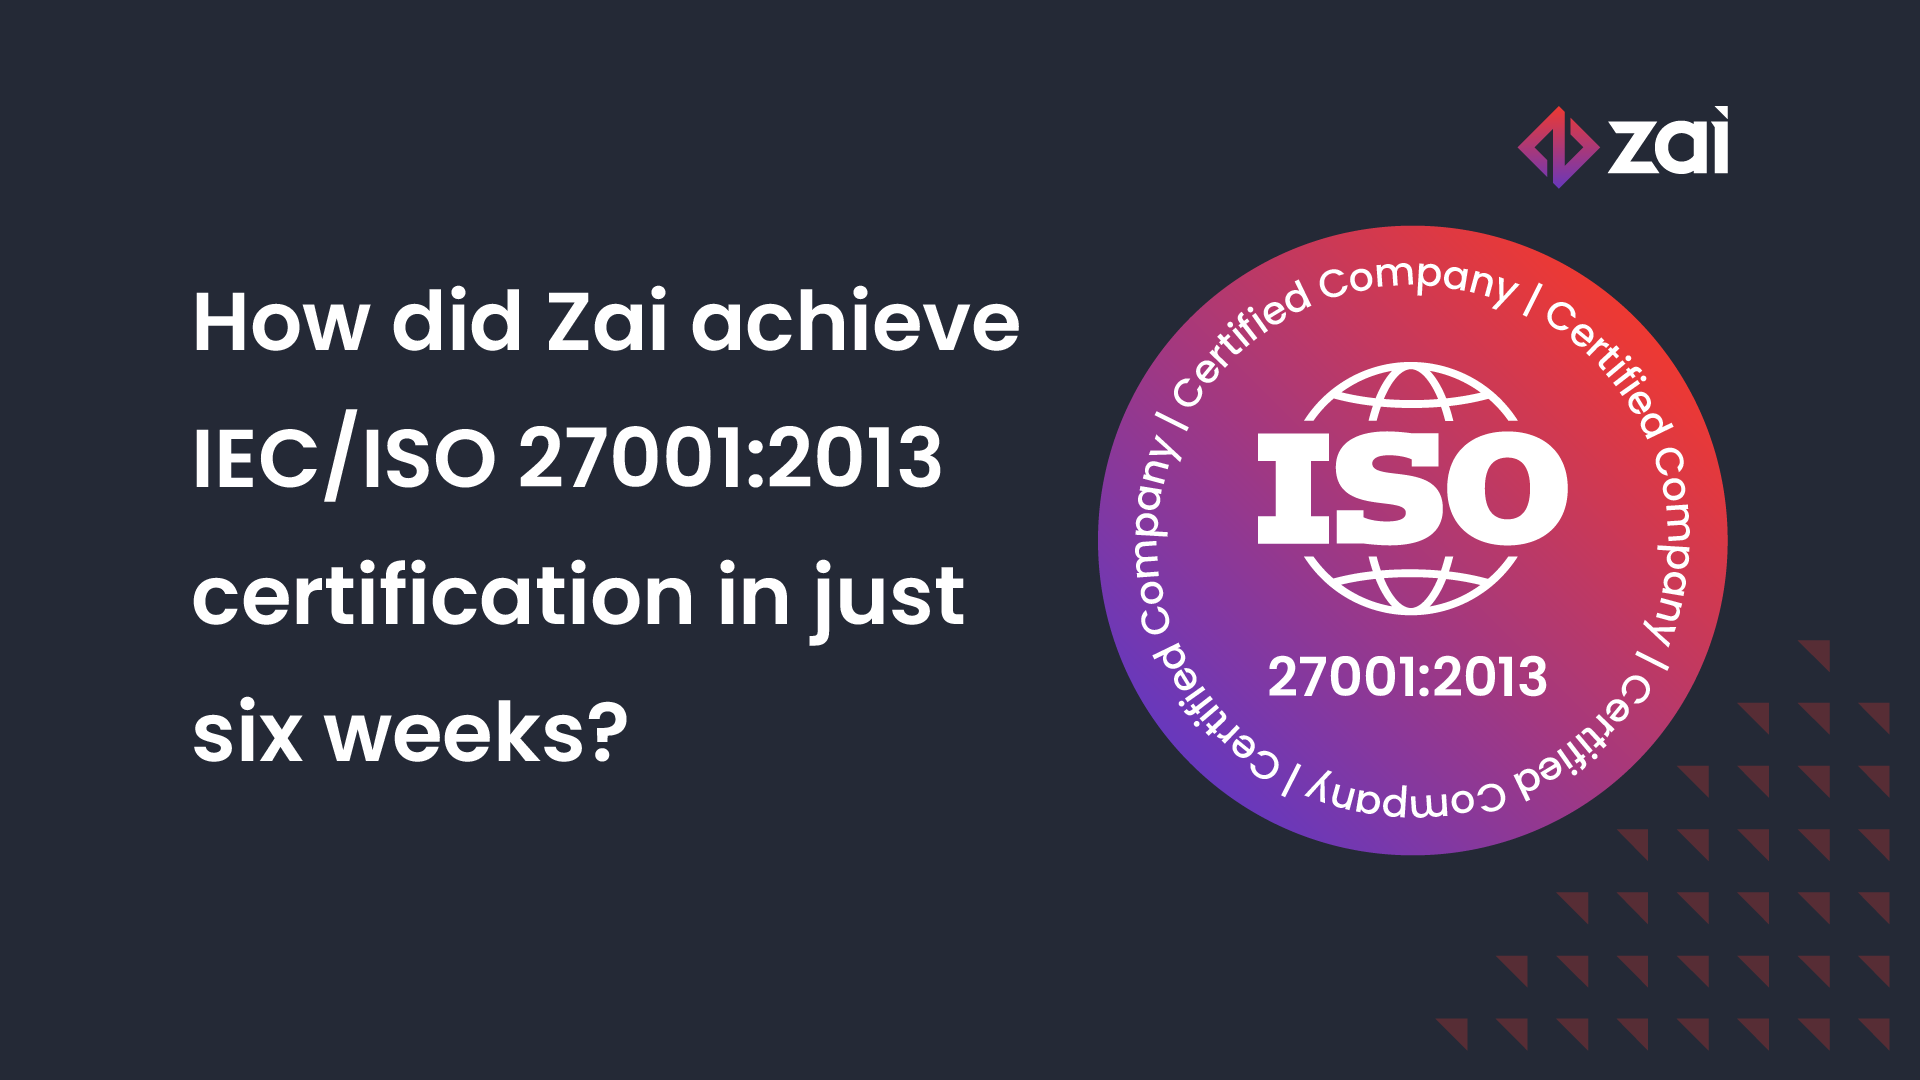 Zai secures IEC/ISO 27001:2013 certification